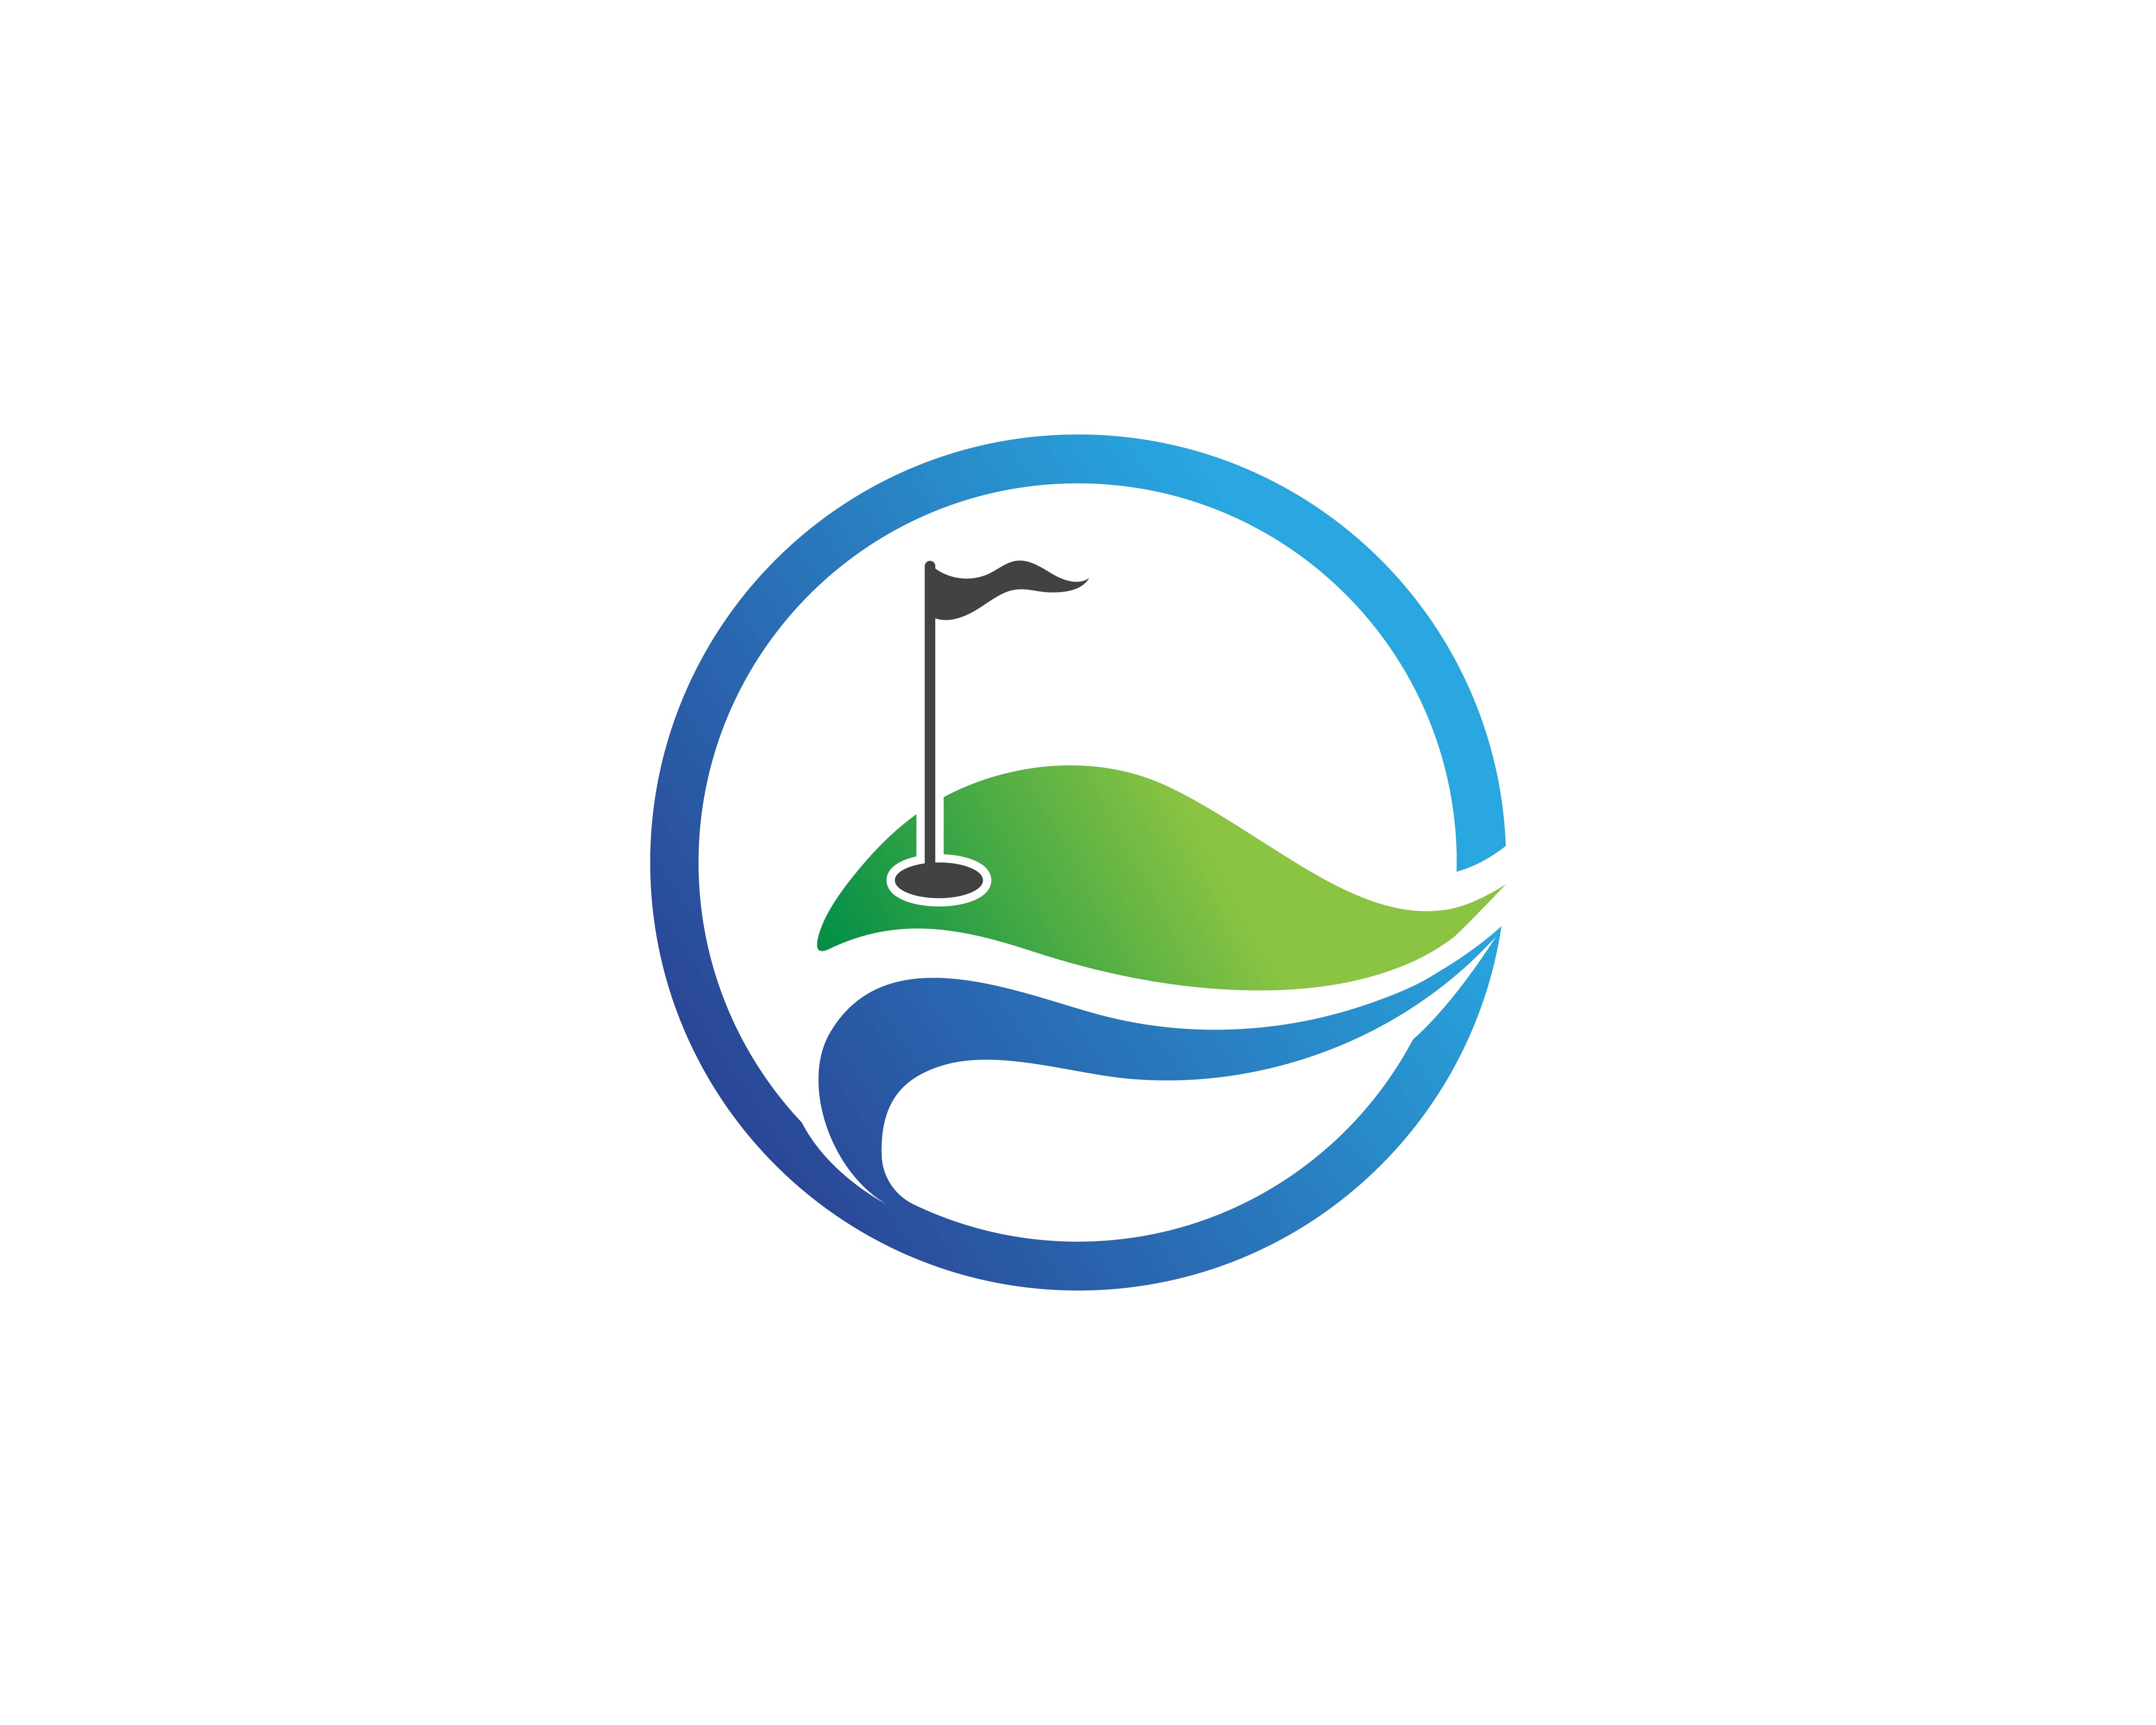 Golf club icons symbols elements and logo vector images 579797 Vector ...